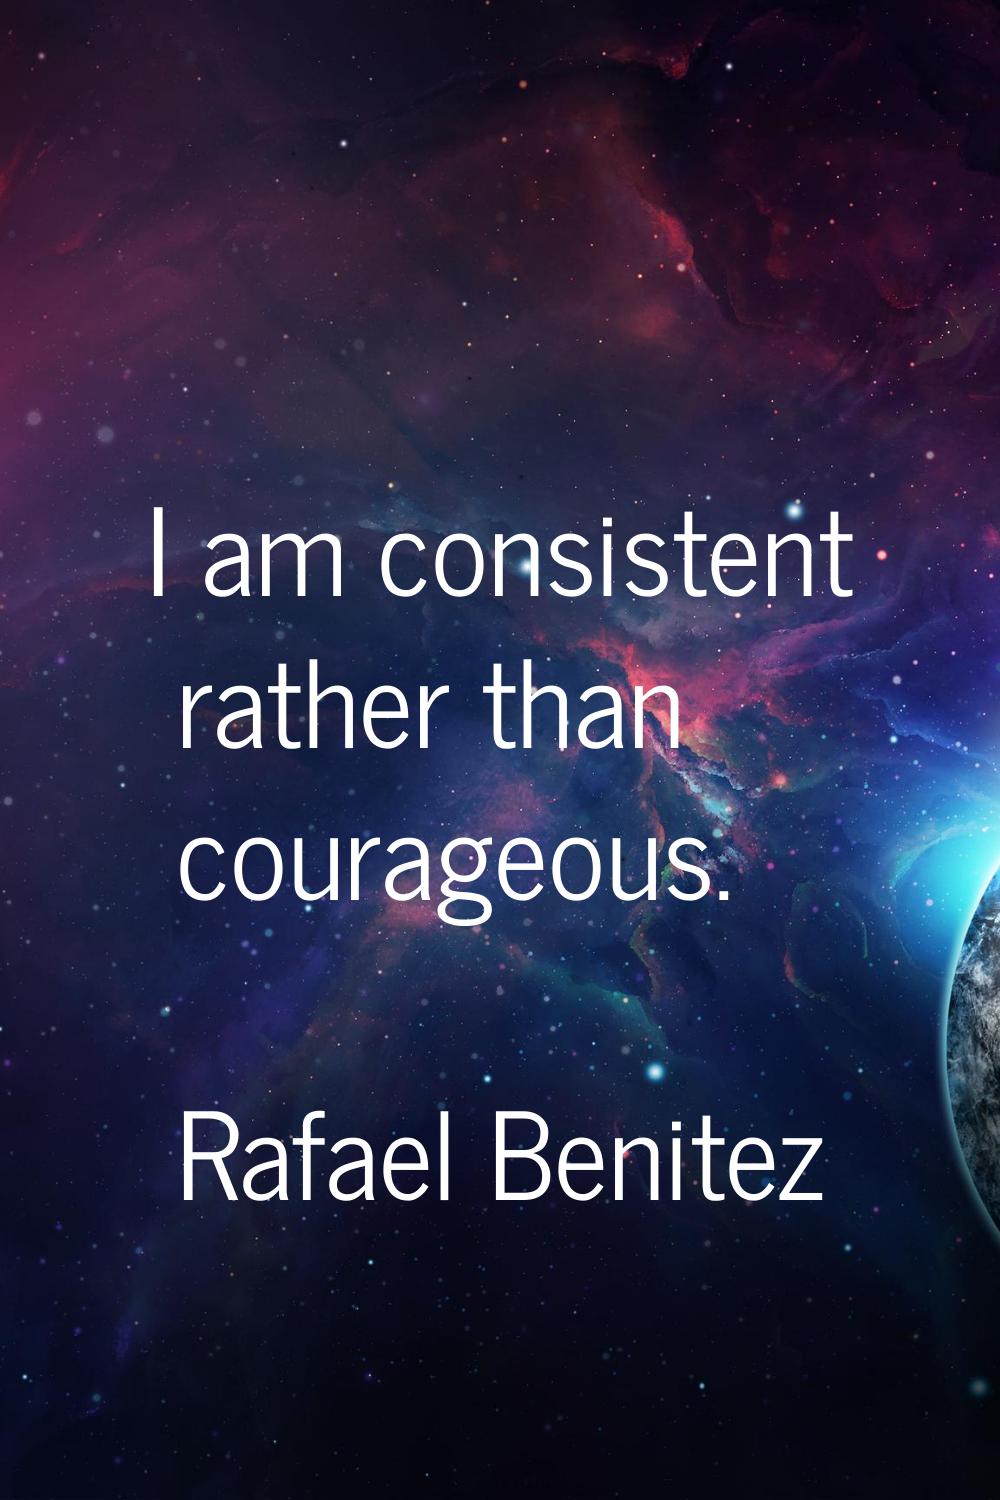 I am consistent rather than courageous.